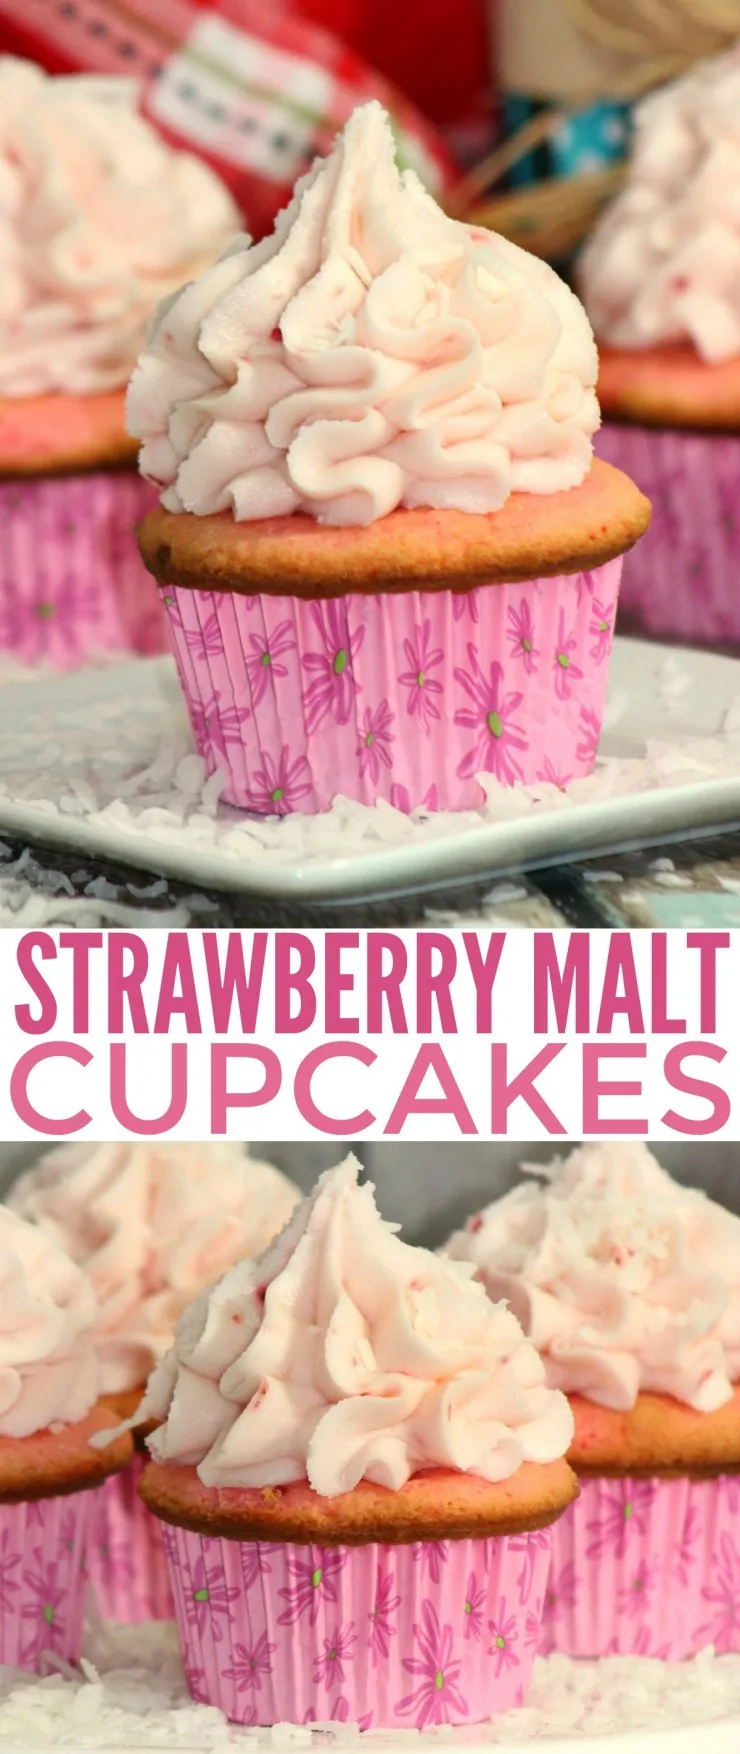 This Strawberry Malt Cupcakes recipe is one of my favourites. A luscious cupcake overflowing with the delicious summer flavour of strawberries.